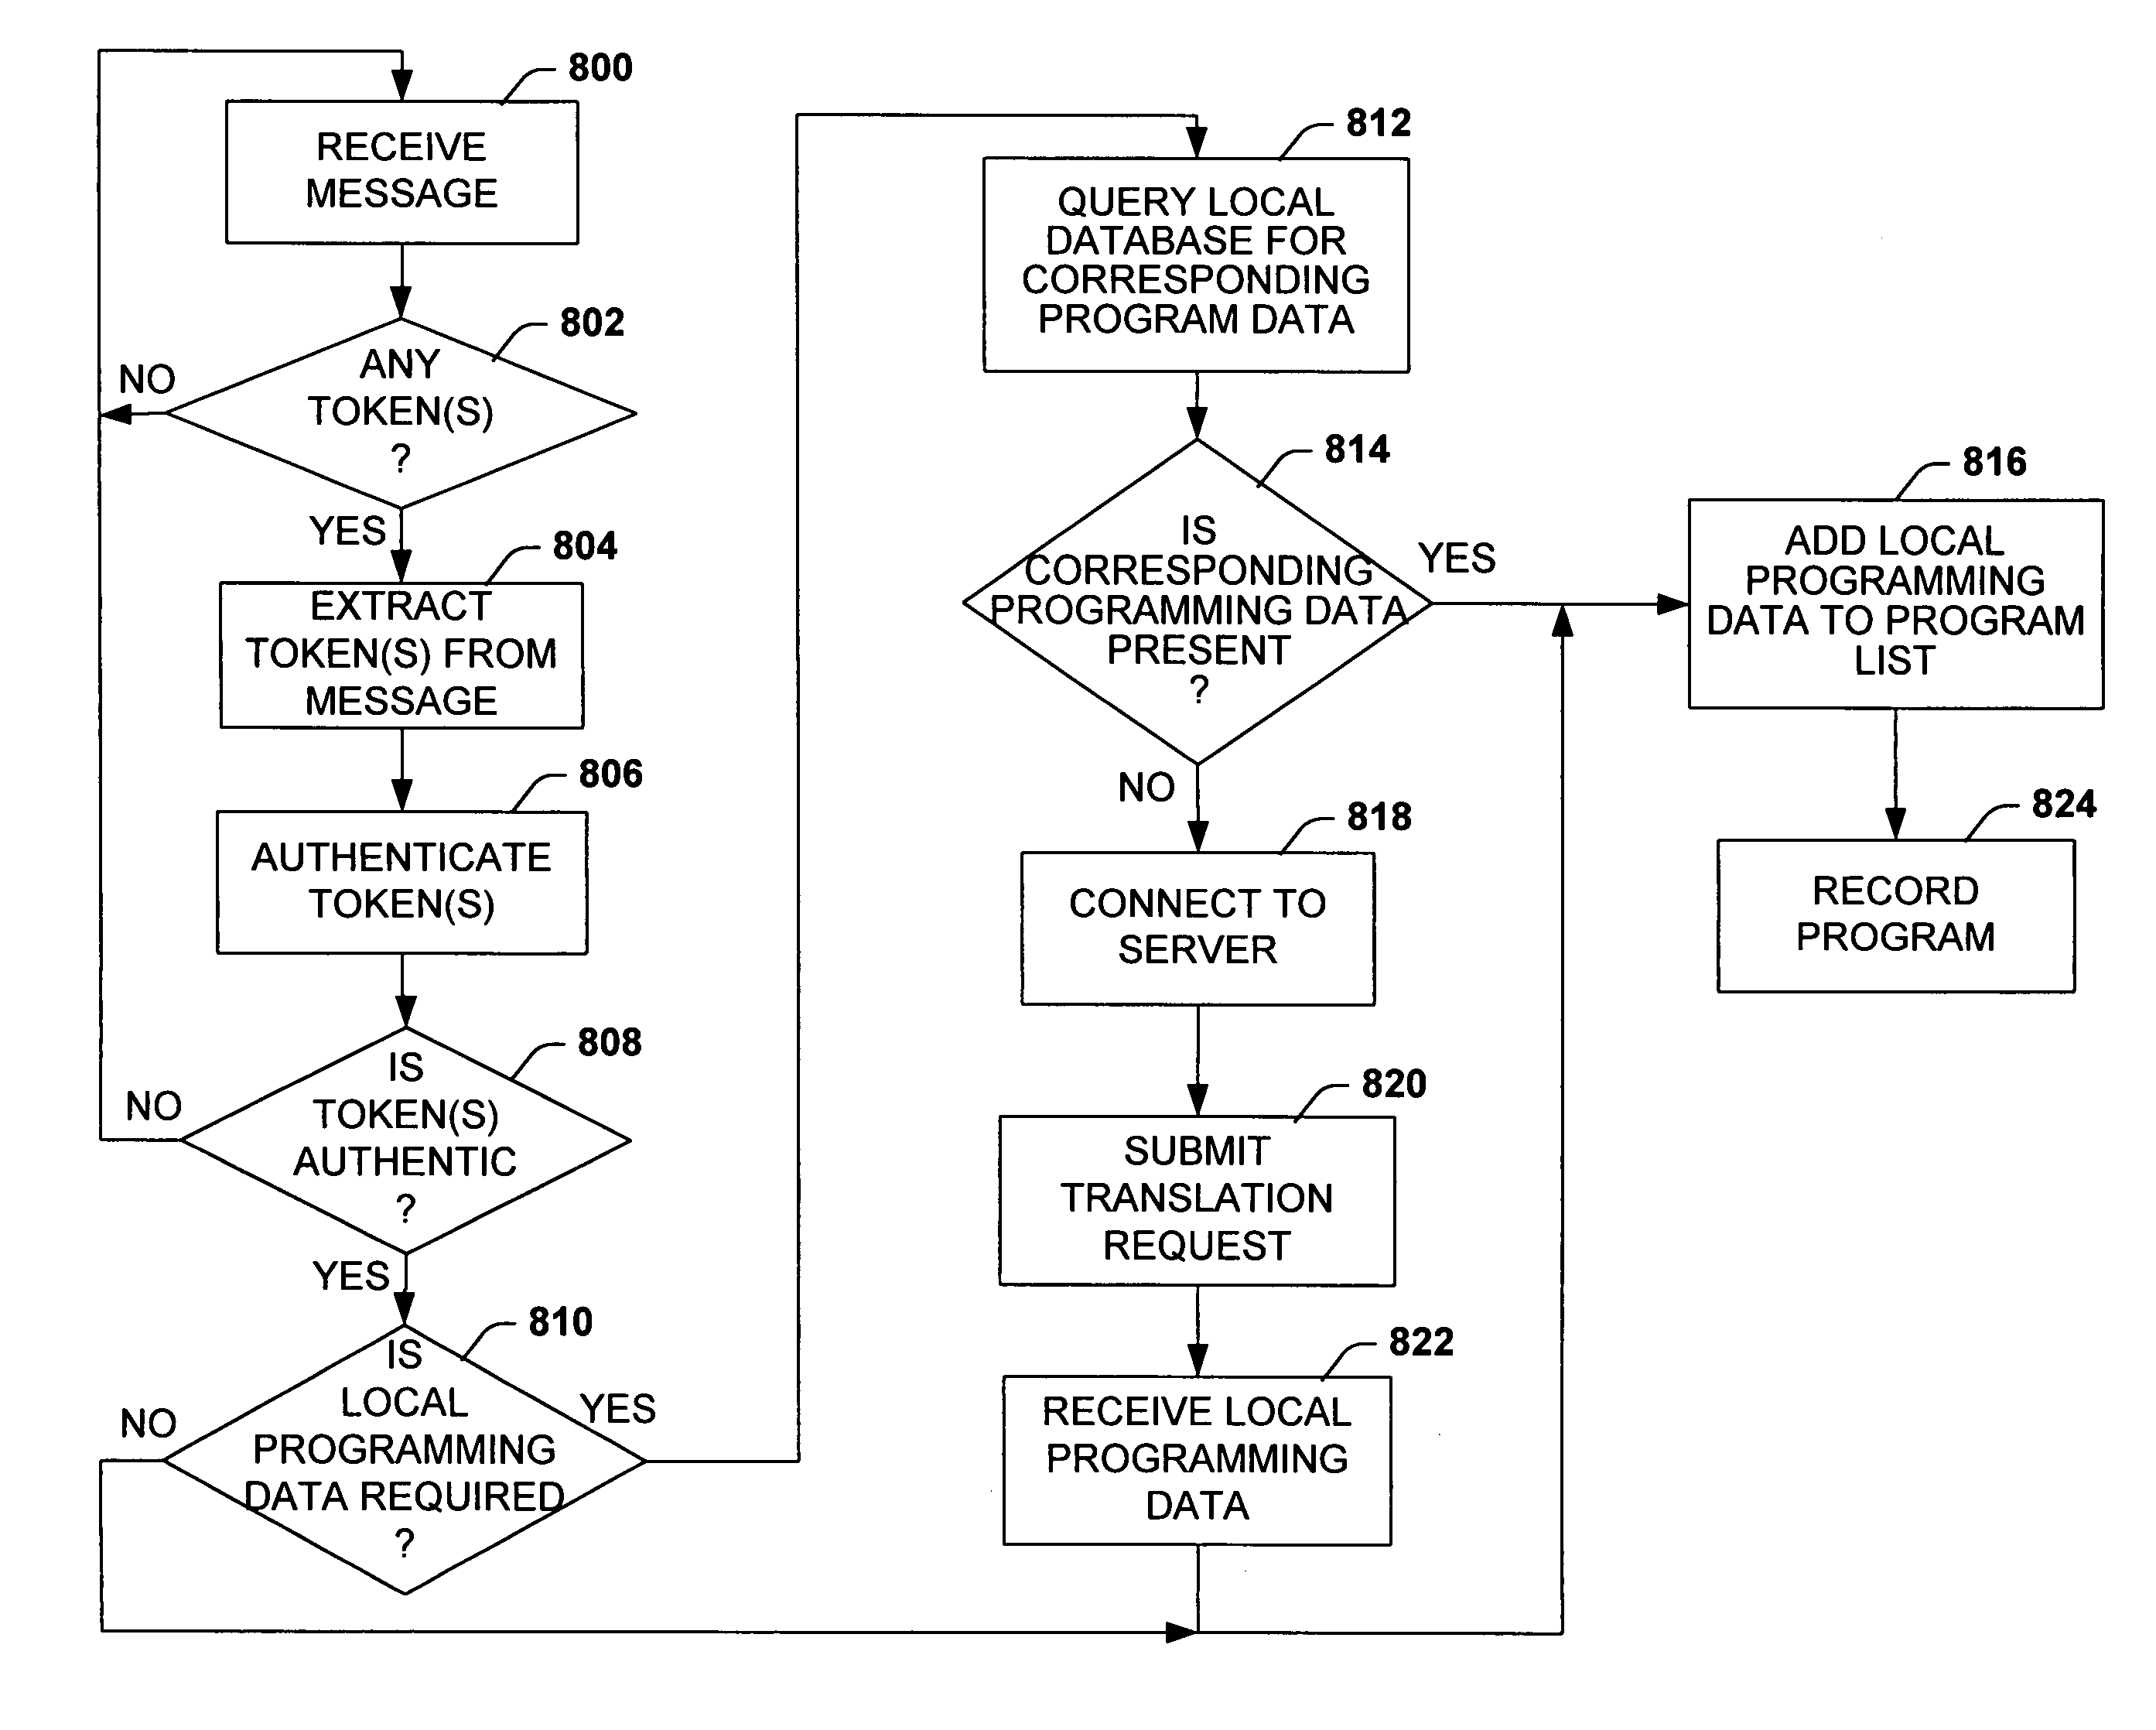 System and method to facilitate selection and programming of an associated audio/visual system